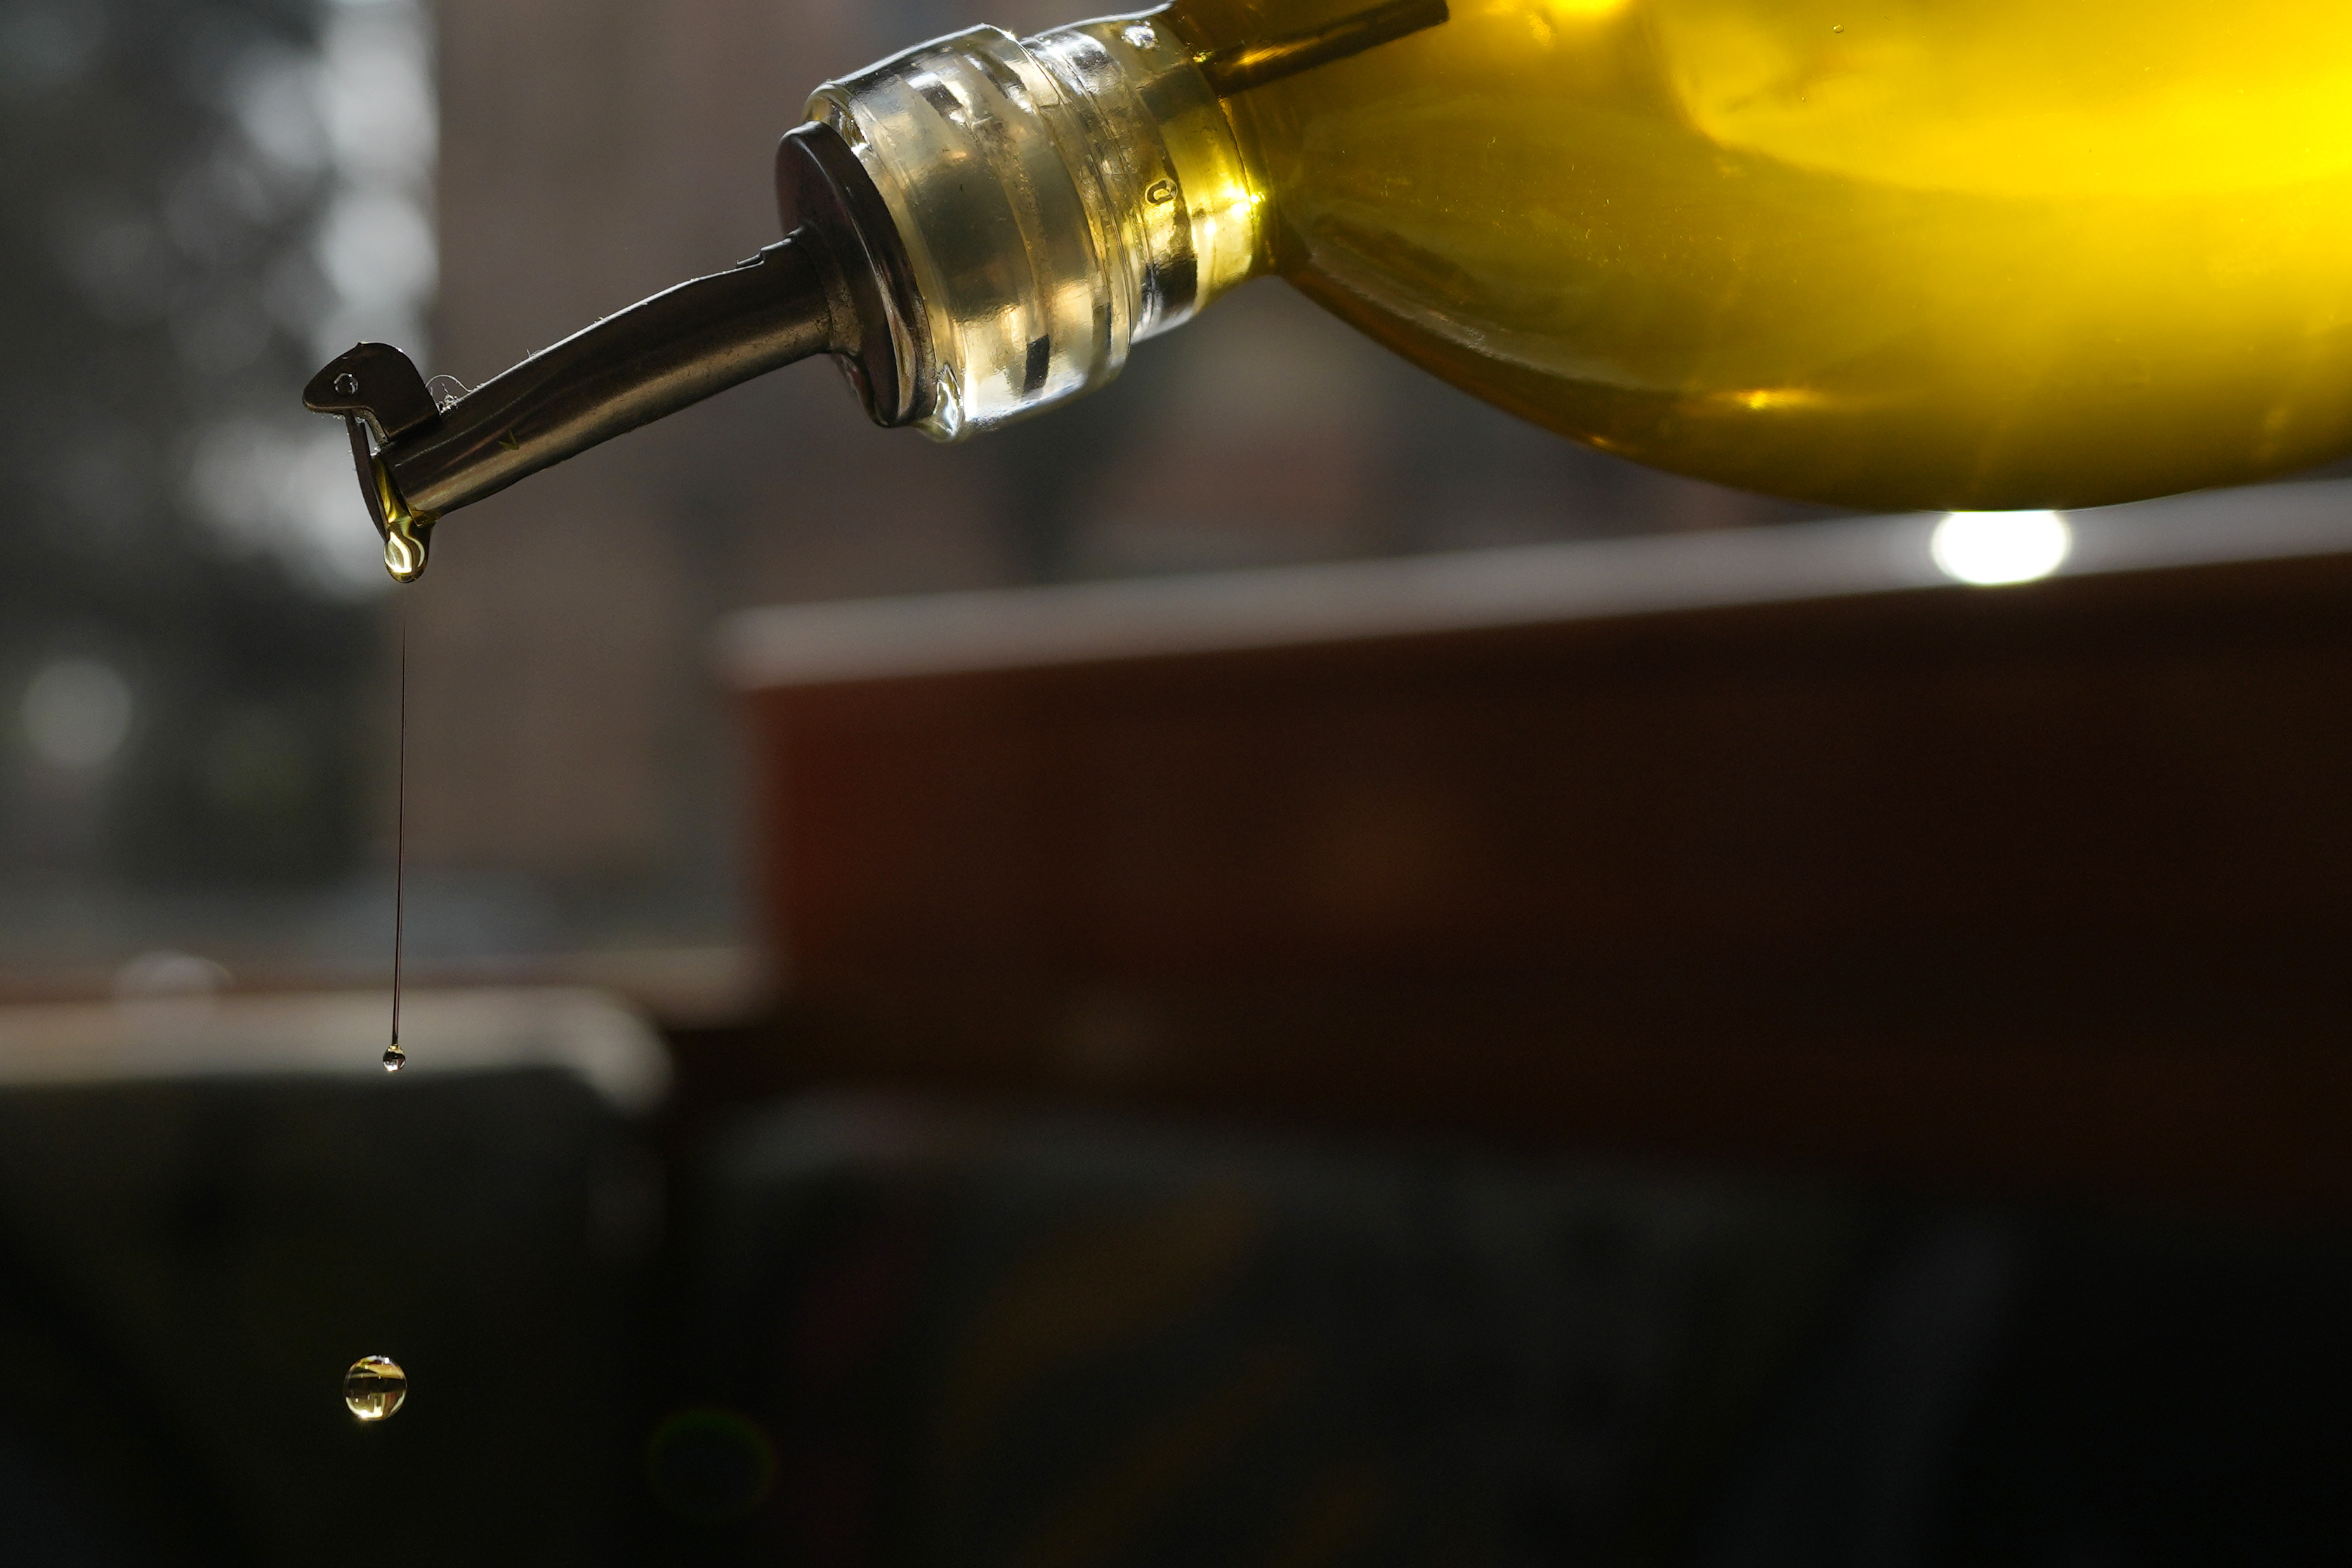 A spoonful of olive oil a day could reduce risk of death from
dementia: study